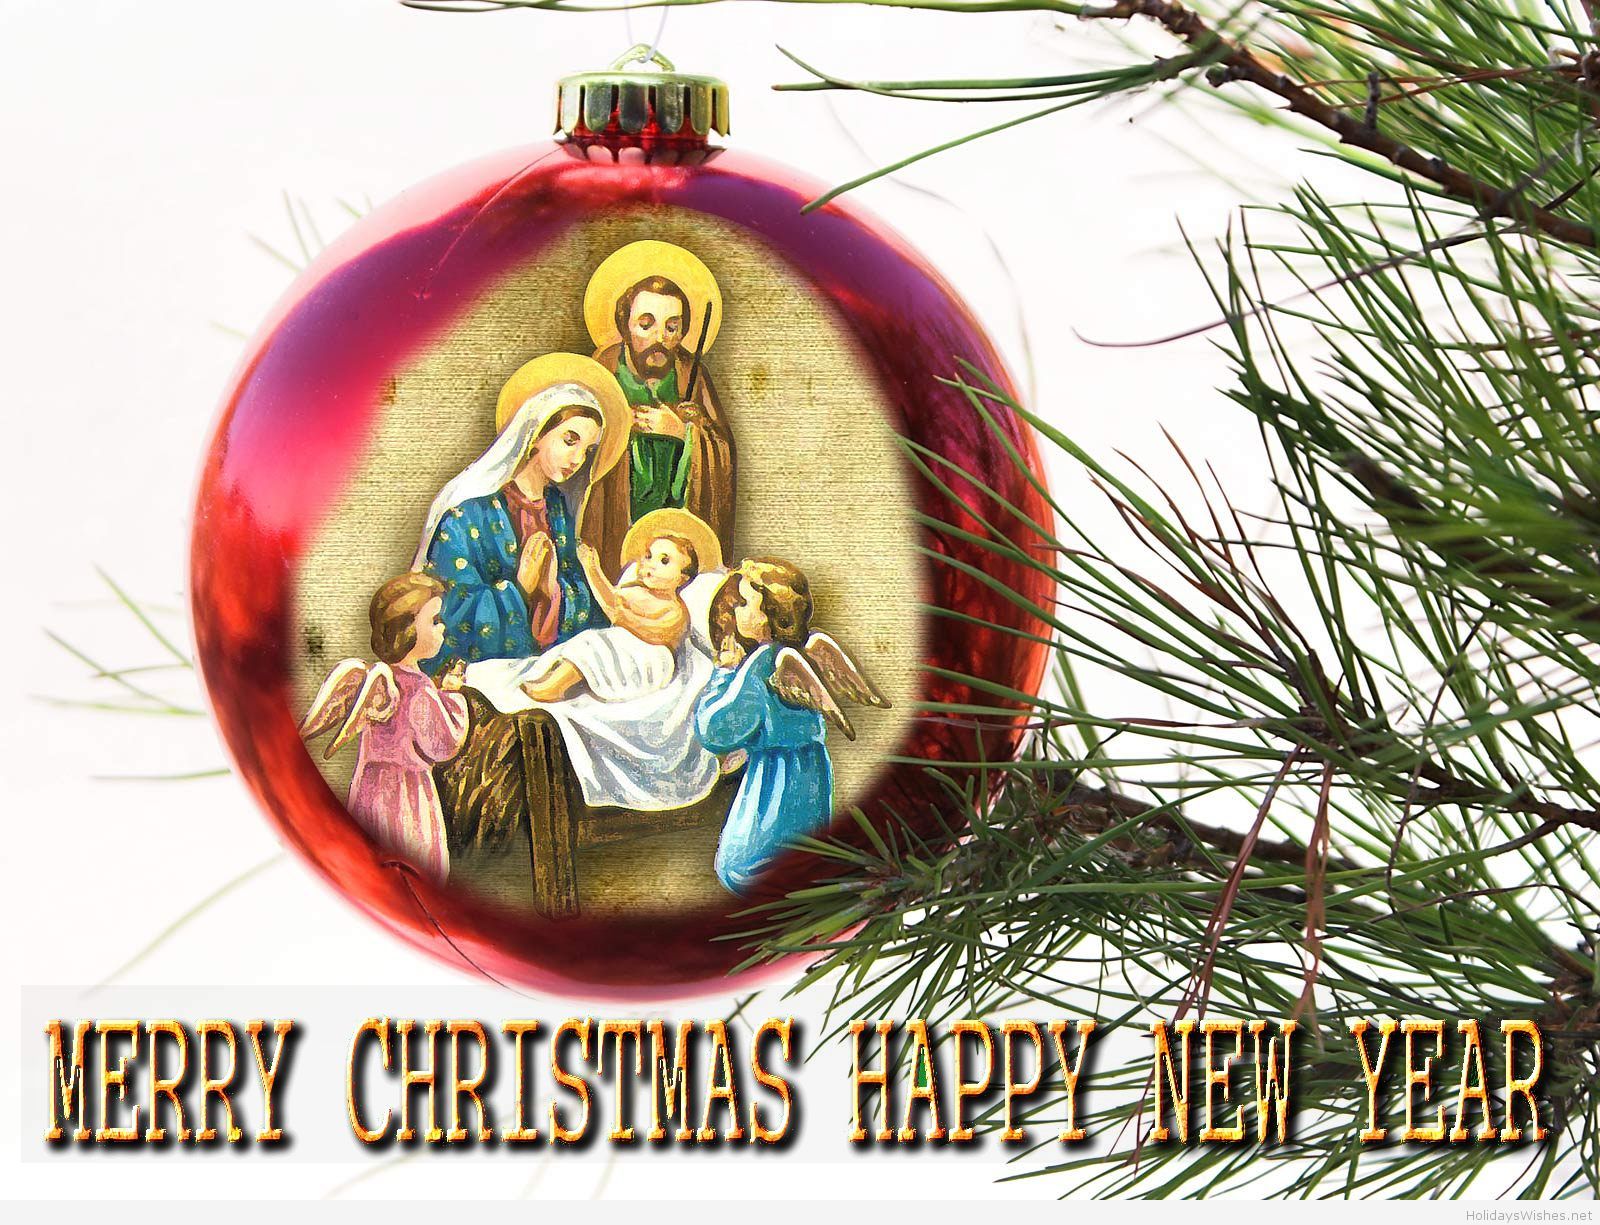 Merry Christmas Happy New Year Religious Wallpaper - Religious Merry Christmas And Happy New Year , HD Wallpaper & Backgrounds